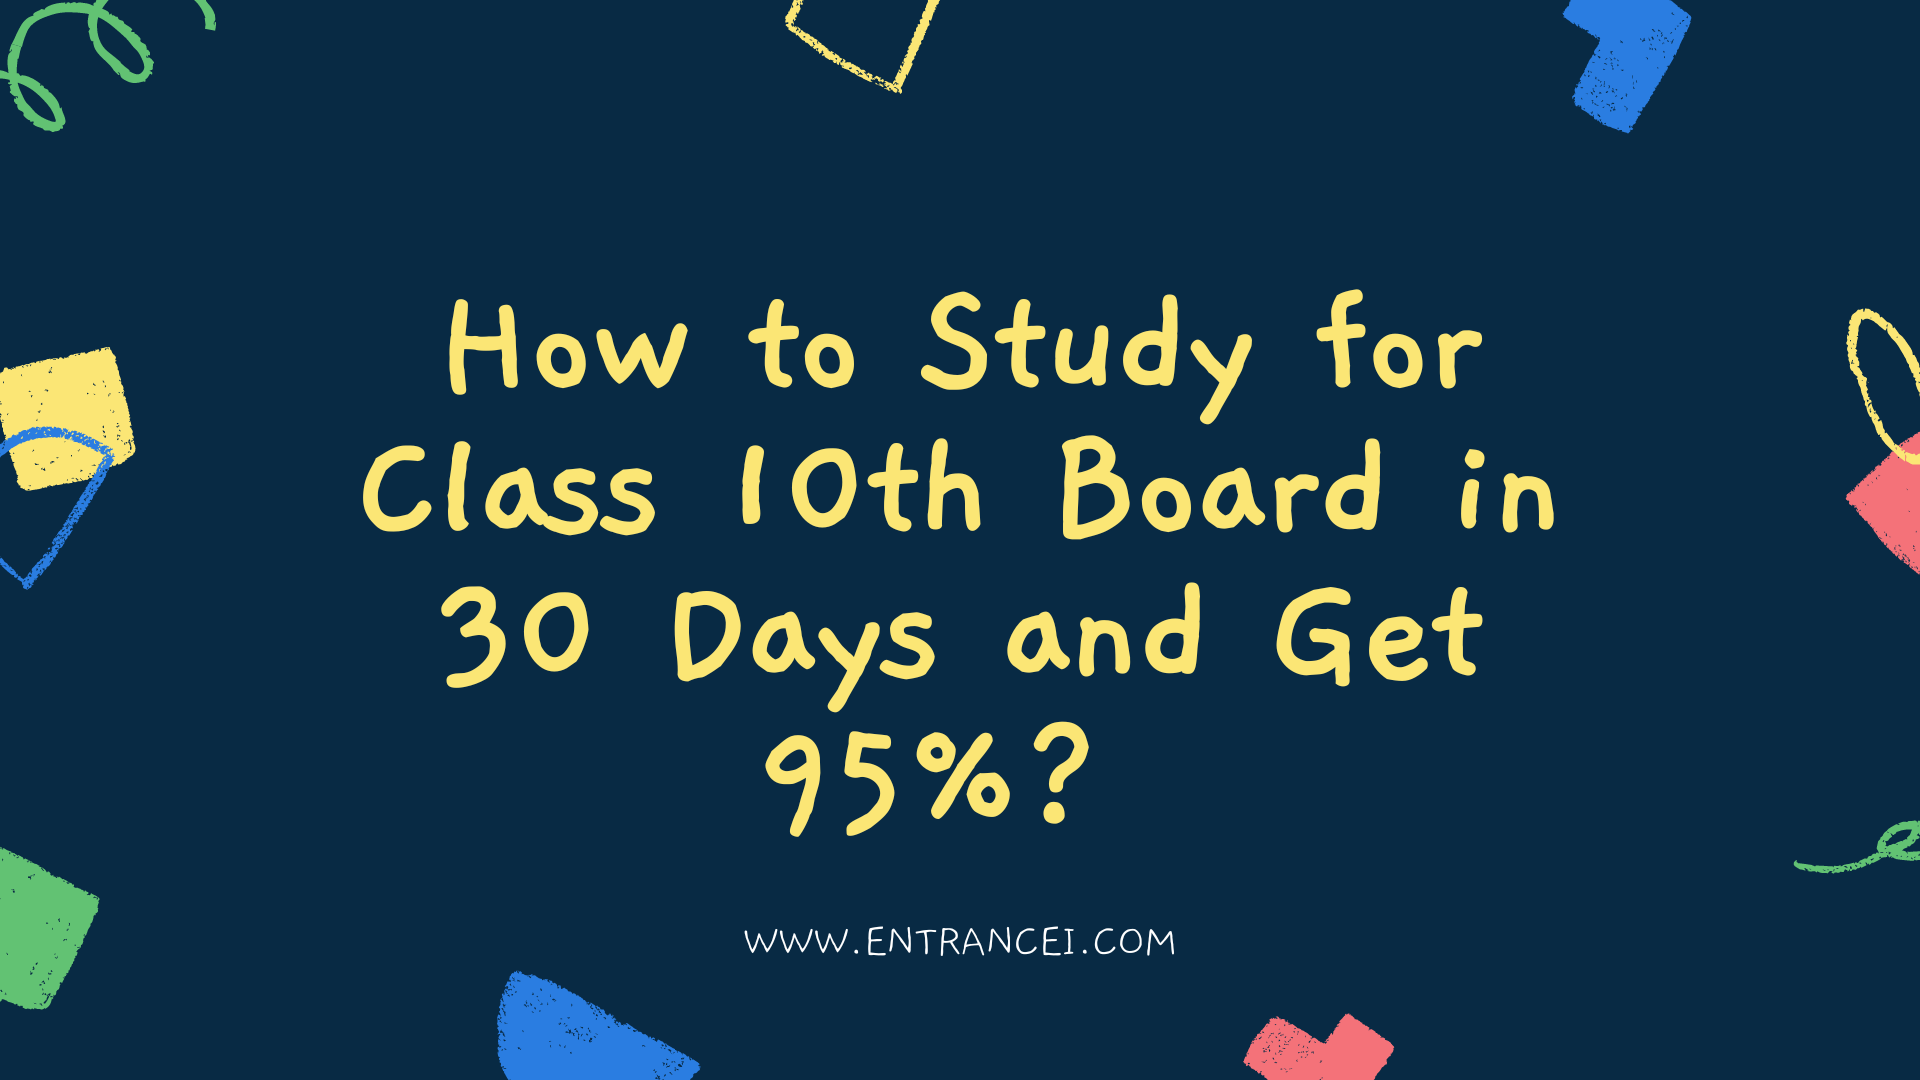 How to Study for Class 10th Board